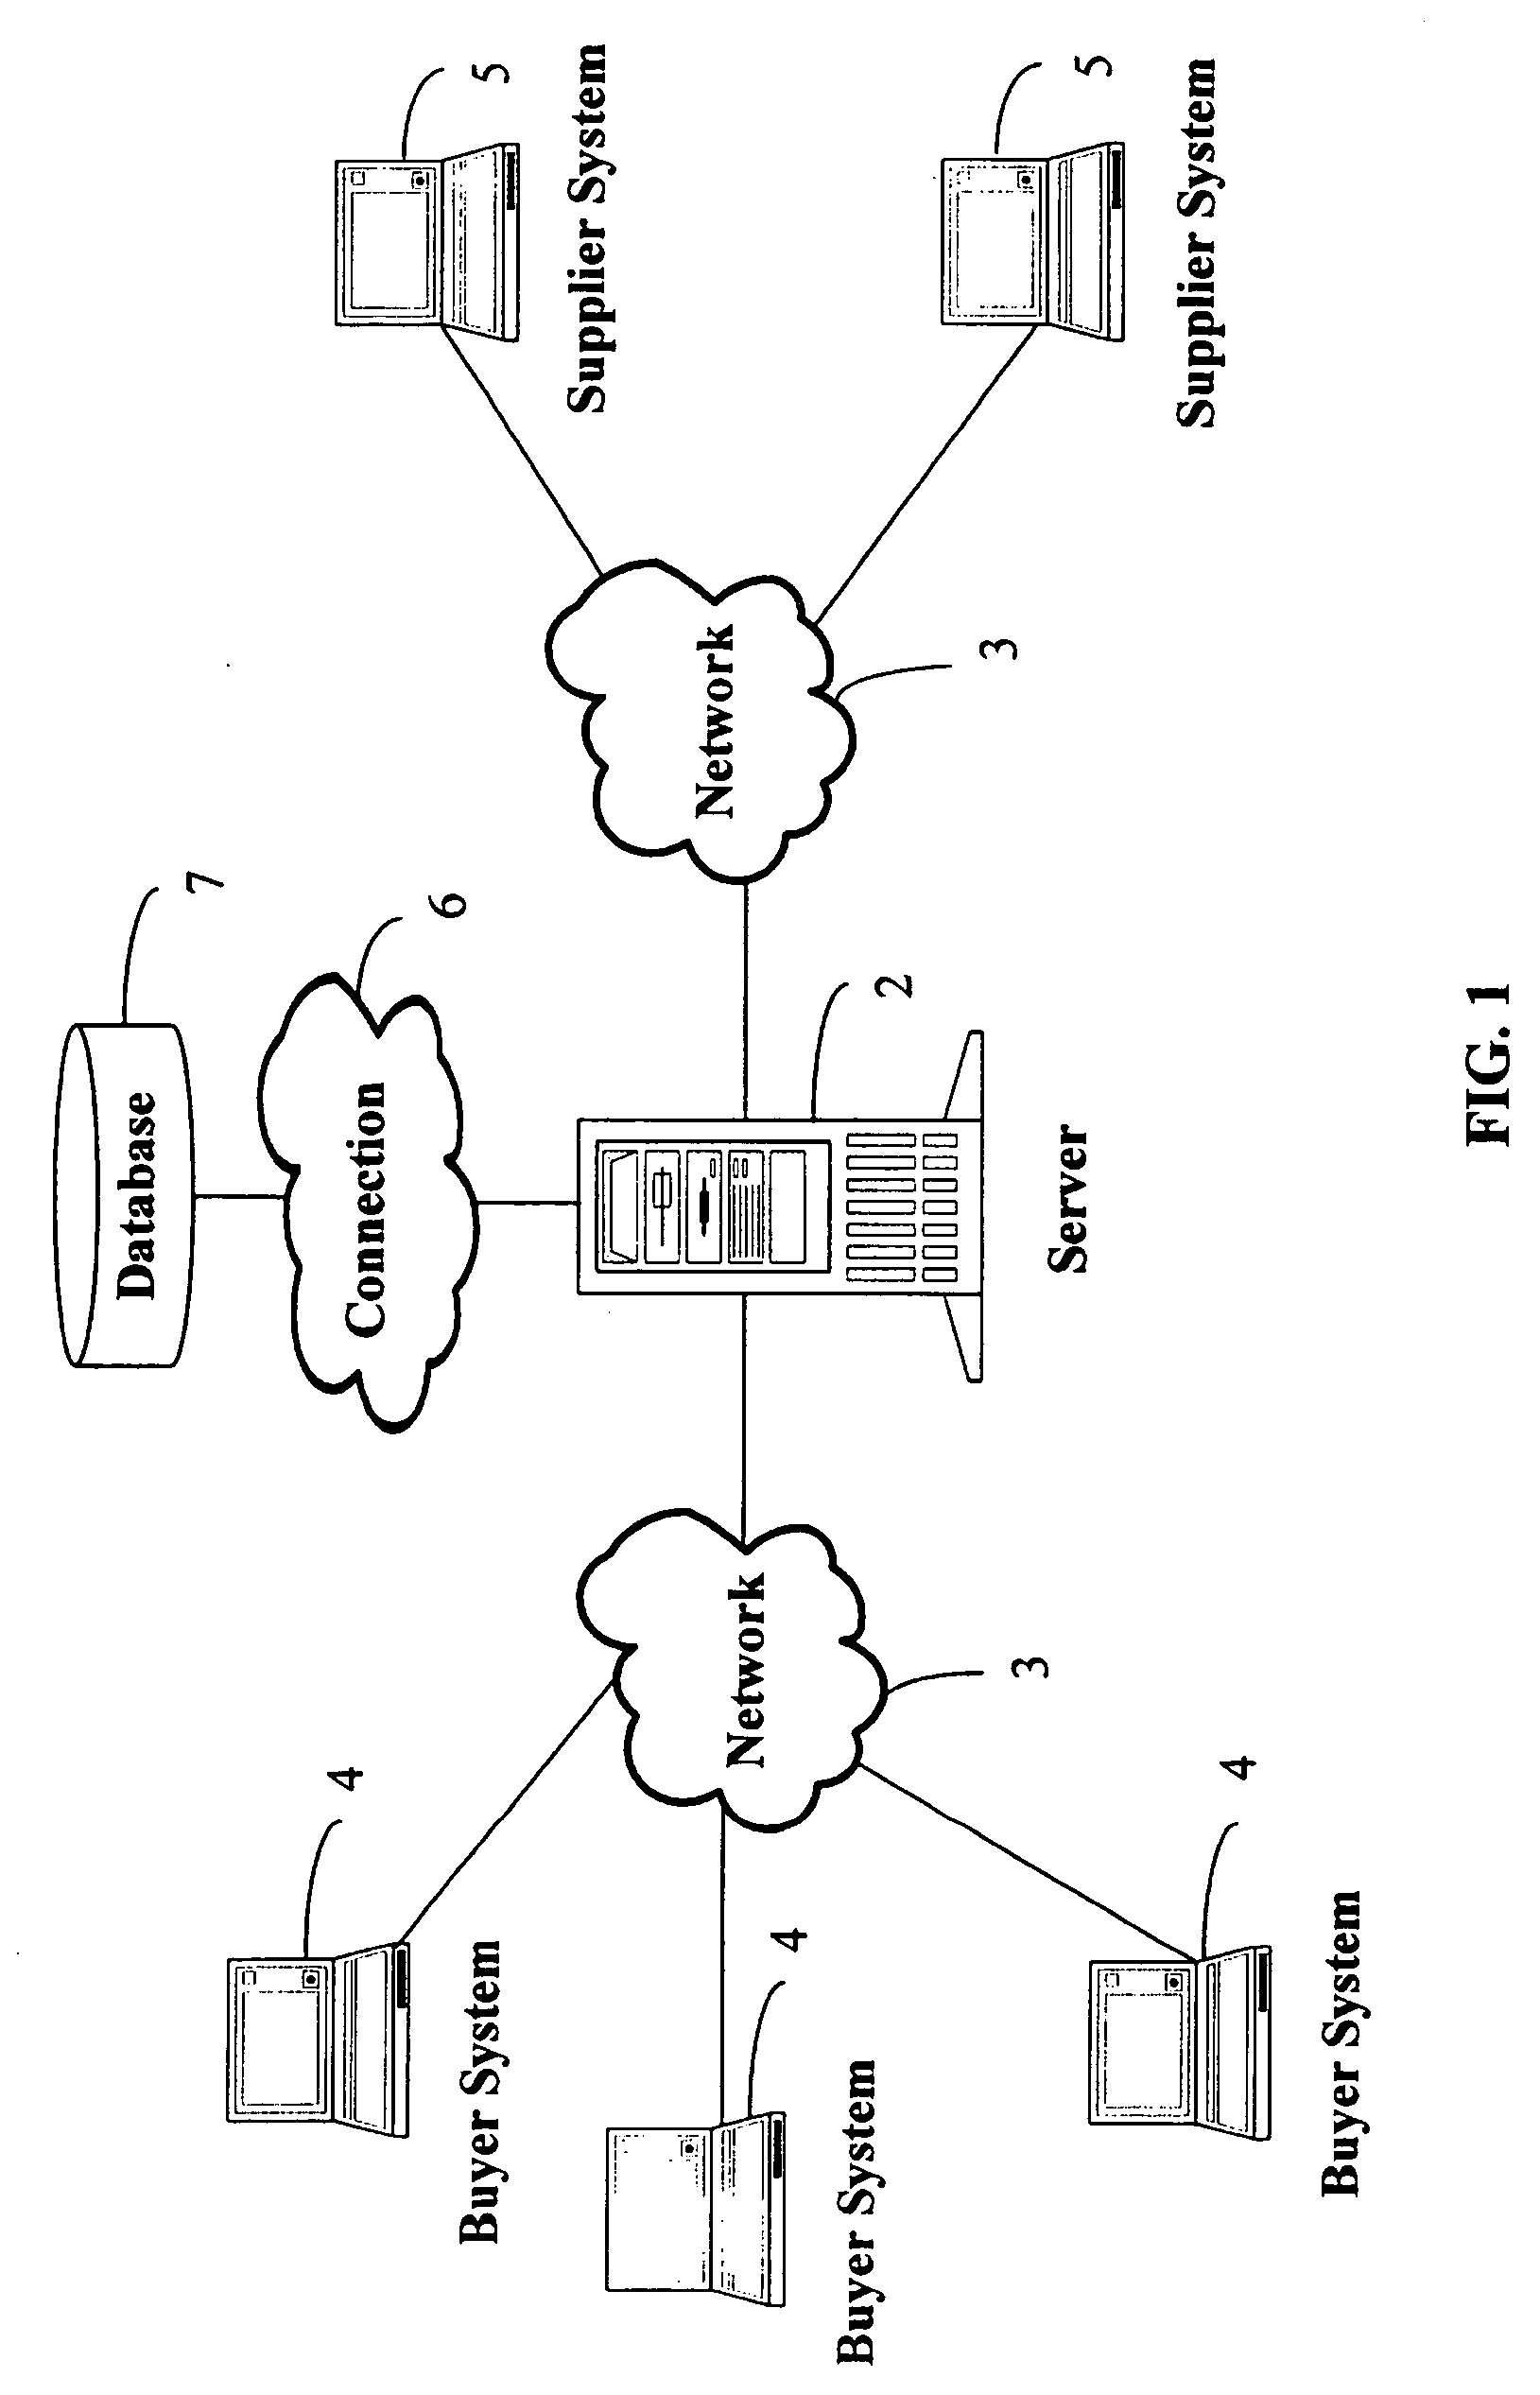 Consolidated procurement management system and method